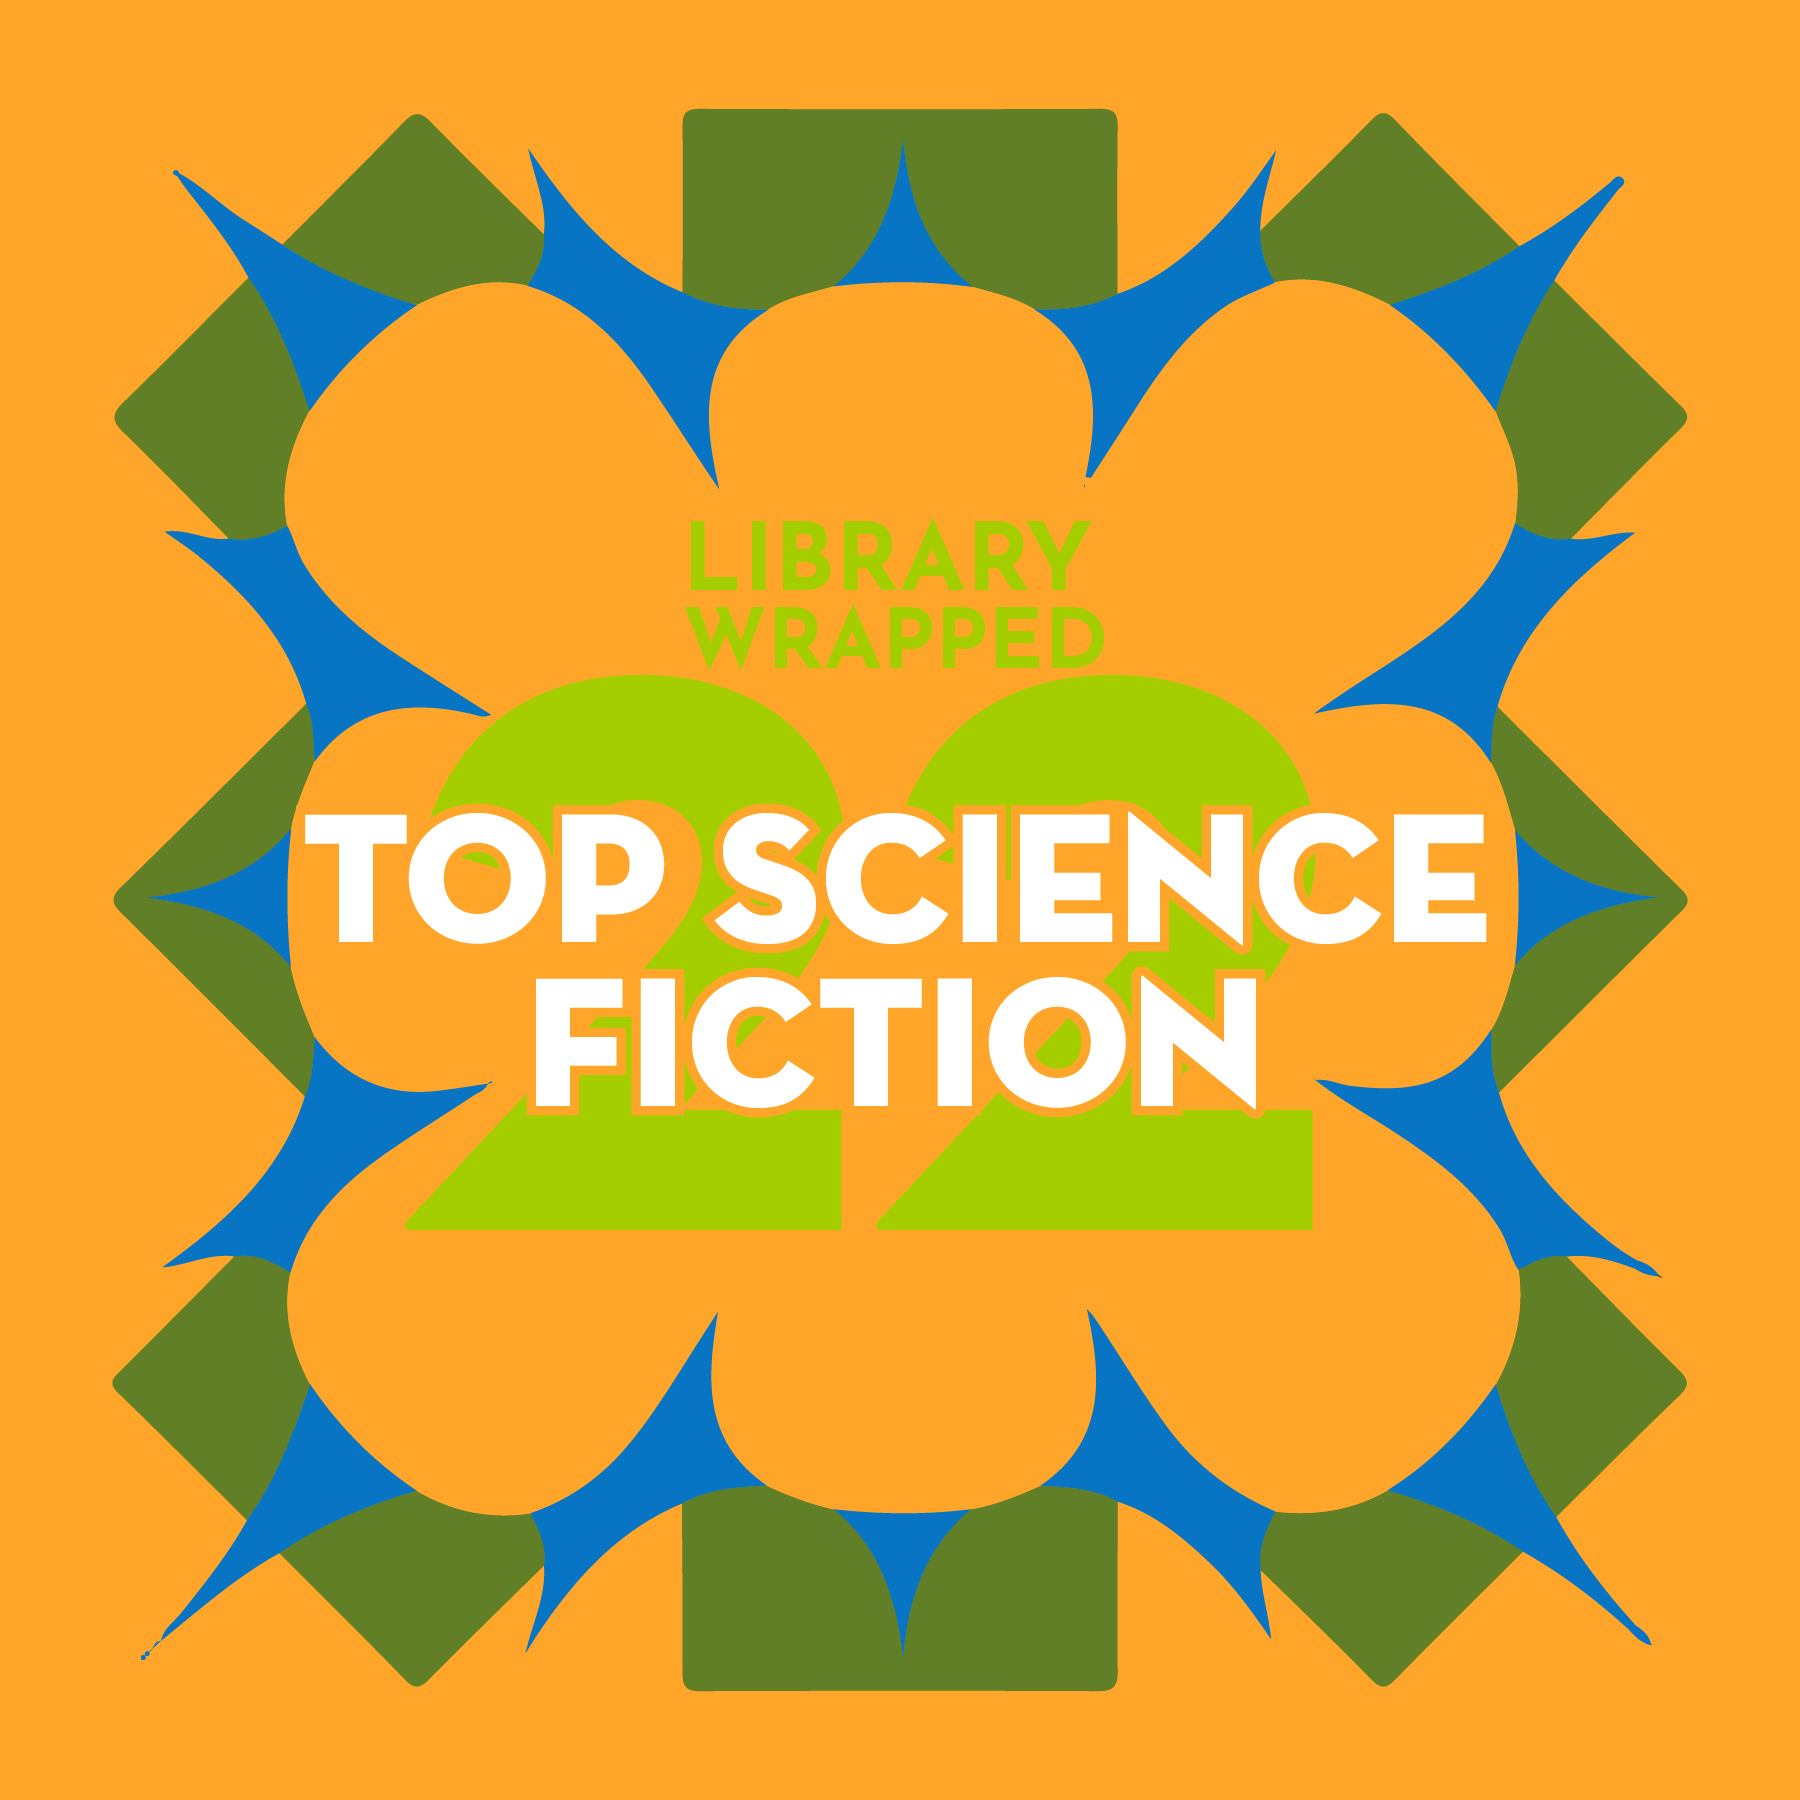 A graphic says 22 Library Wrapped Top Science Fiction over an orange background.